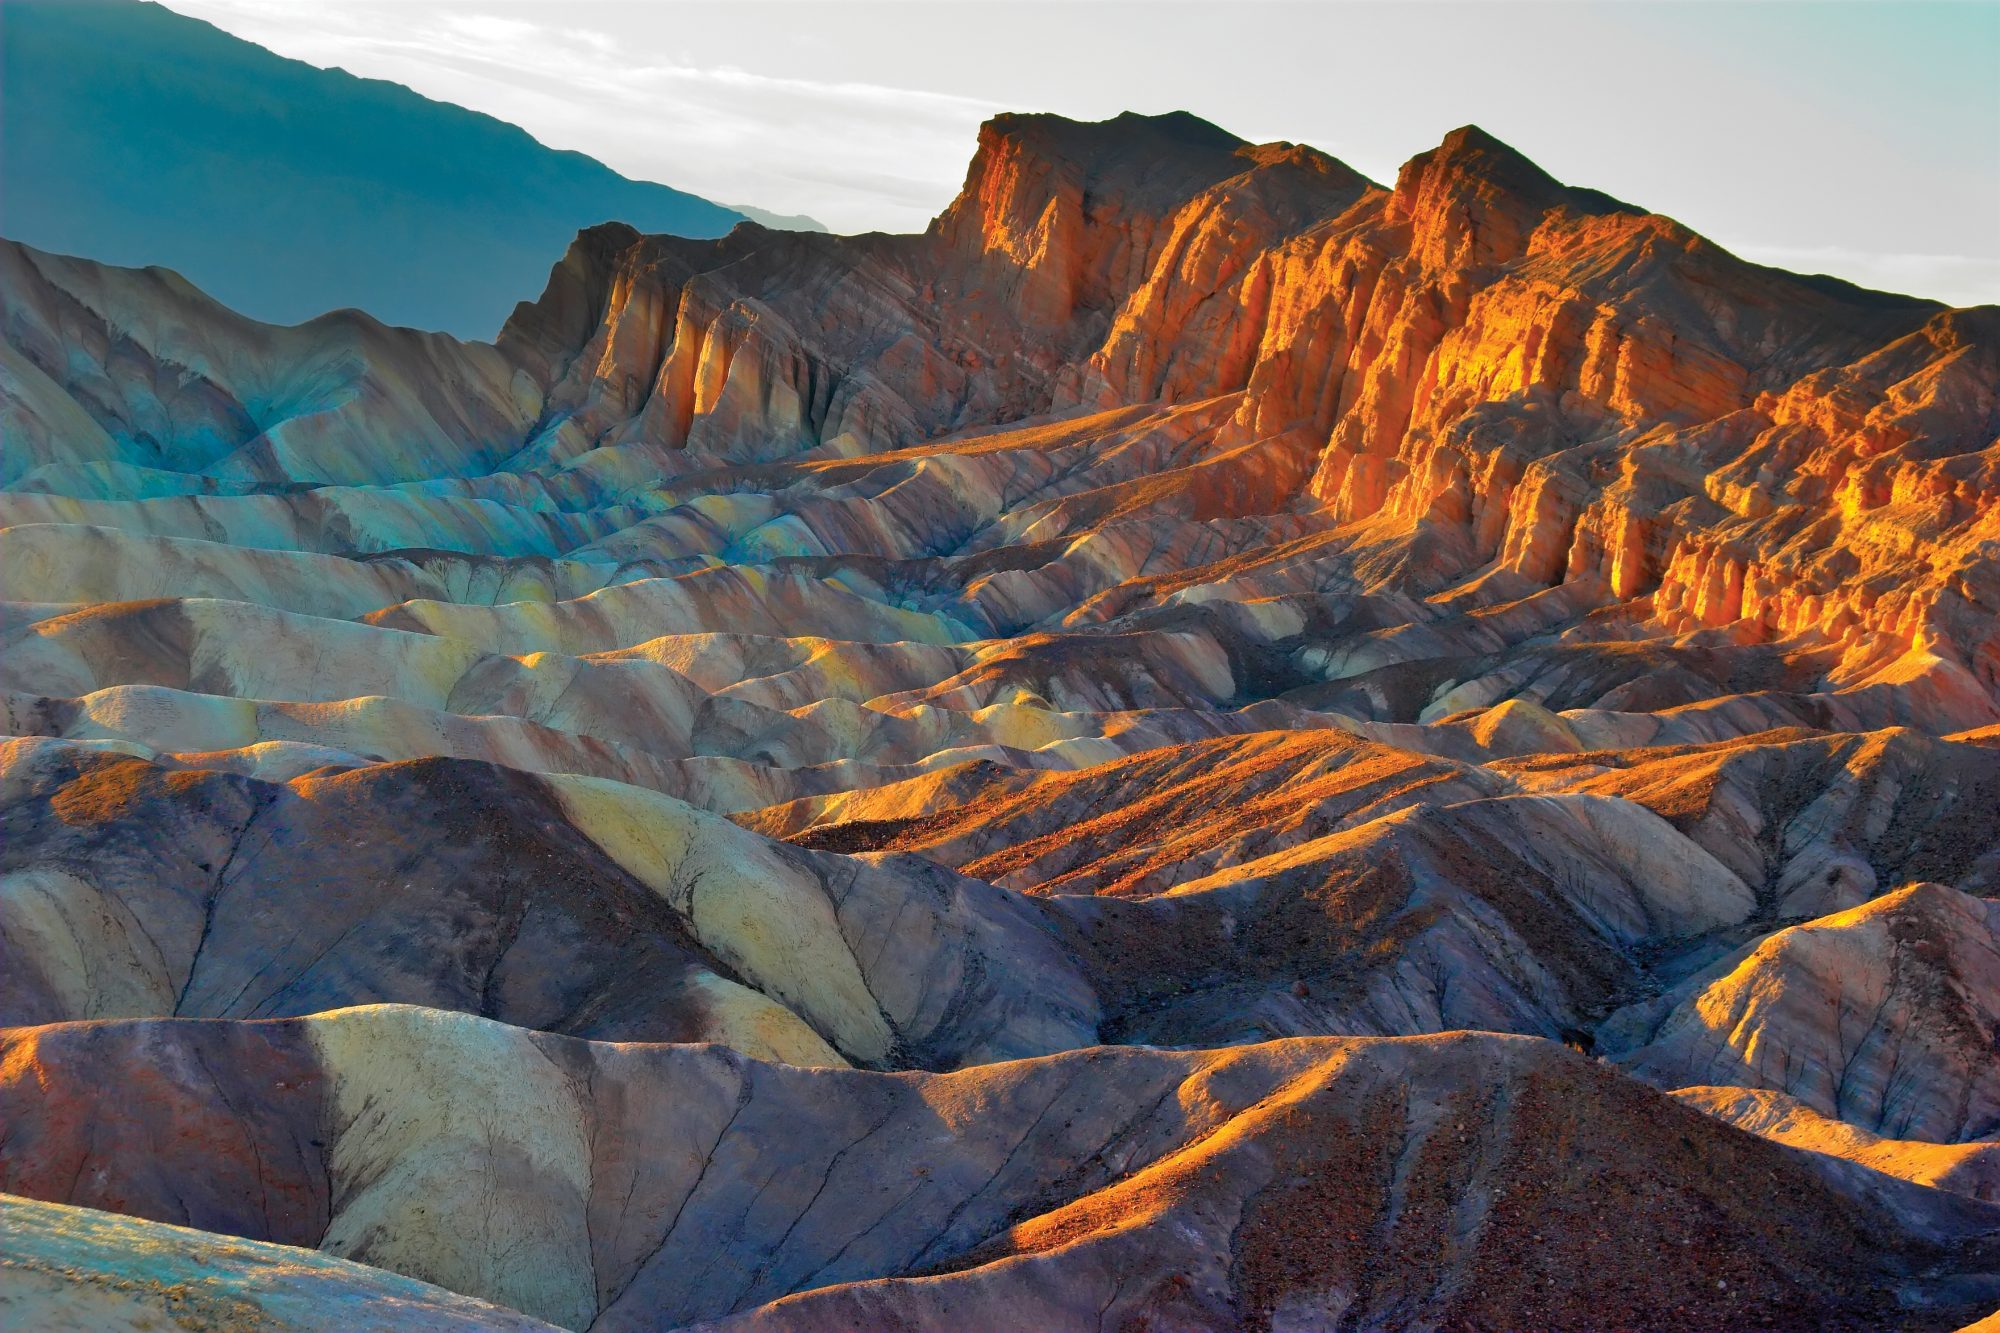 A beautiful and well-known part of Death valley "Zabriskie-point".